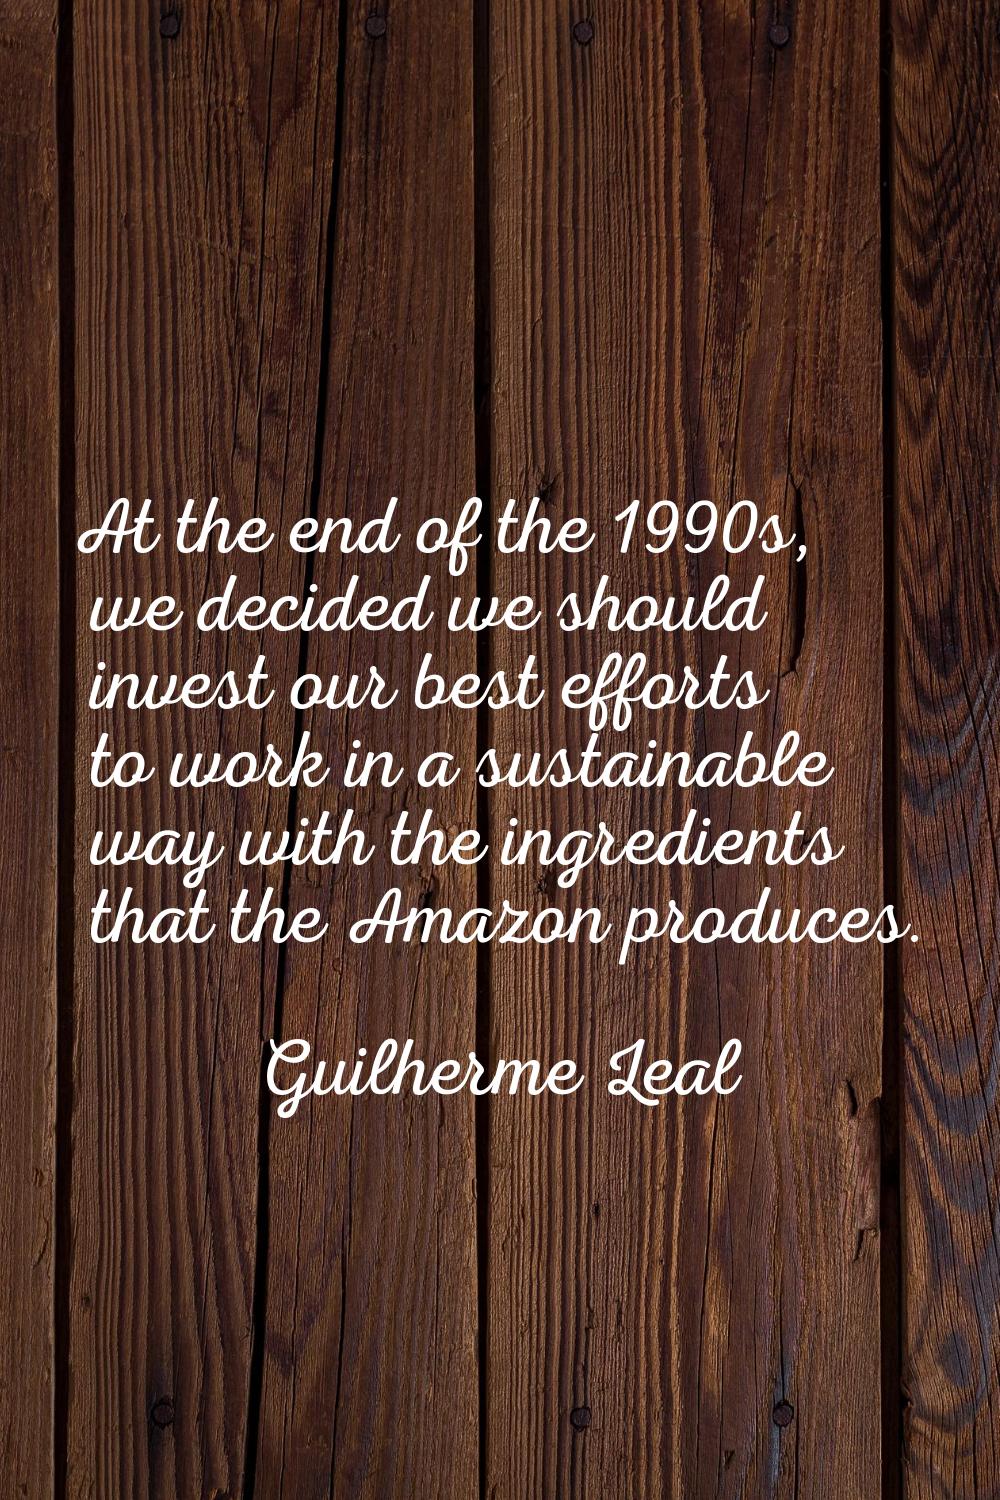 At the end of the 1990s, we decided we should invest our best efforts to work in a sustainable way 